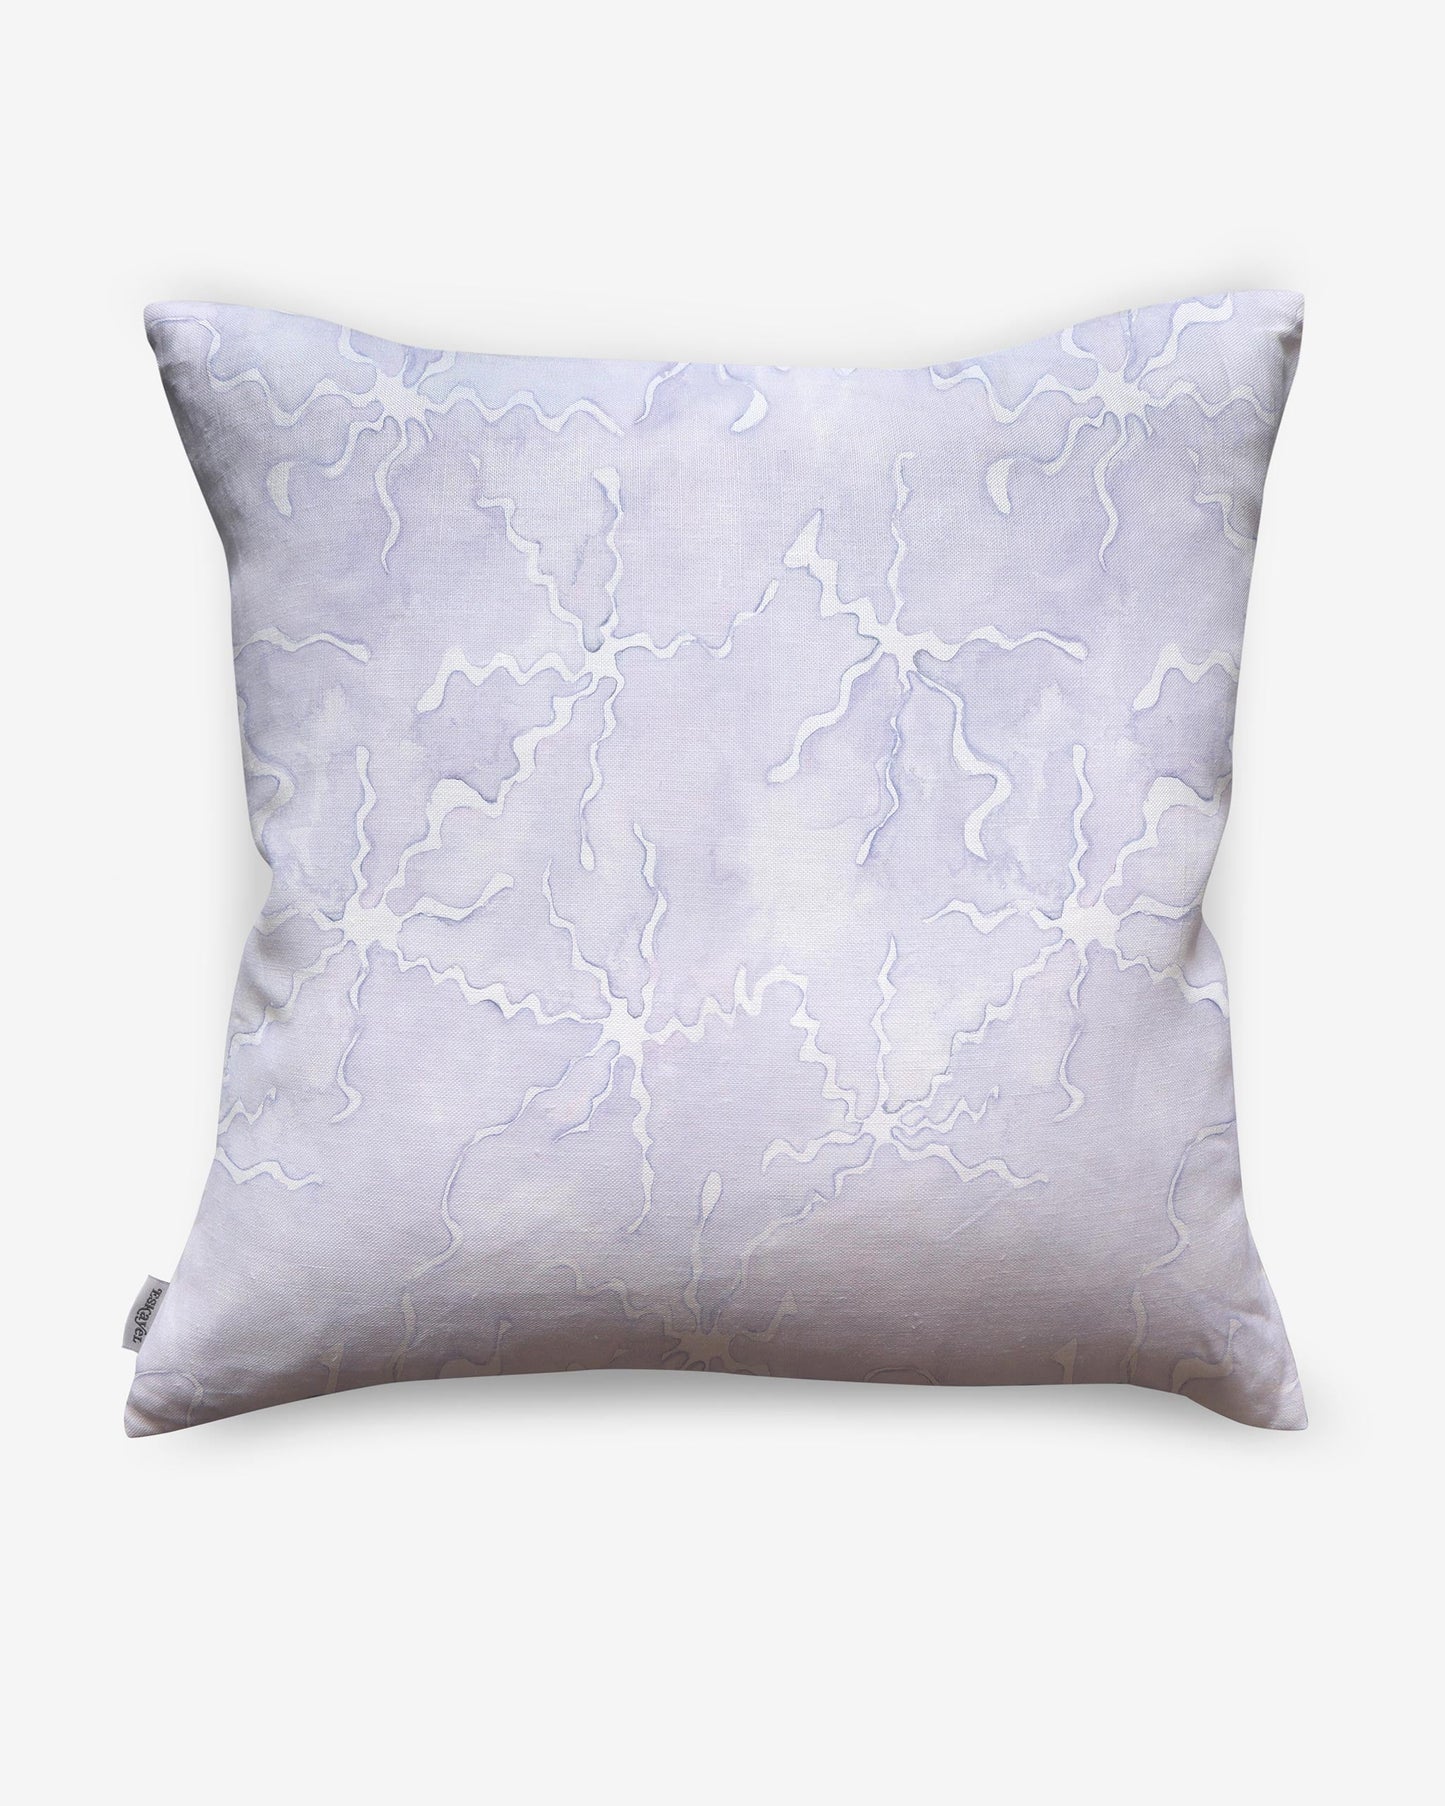 A Pecosa Pillow with a white and lavender resist dye techniques pattern